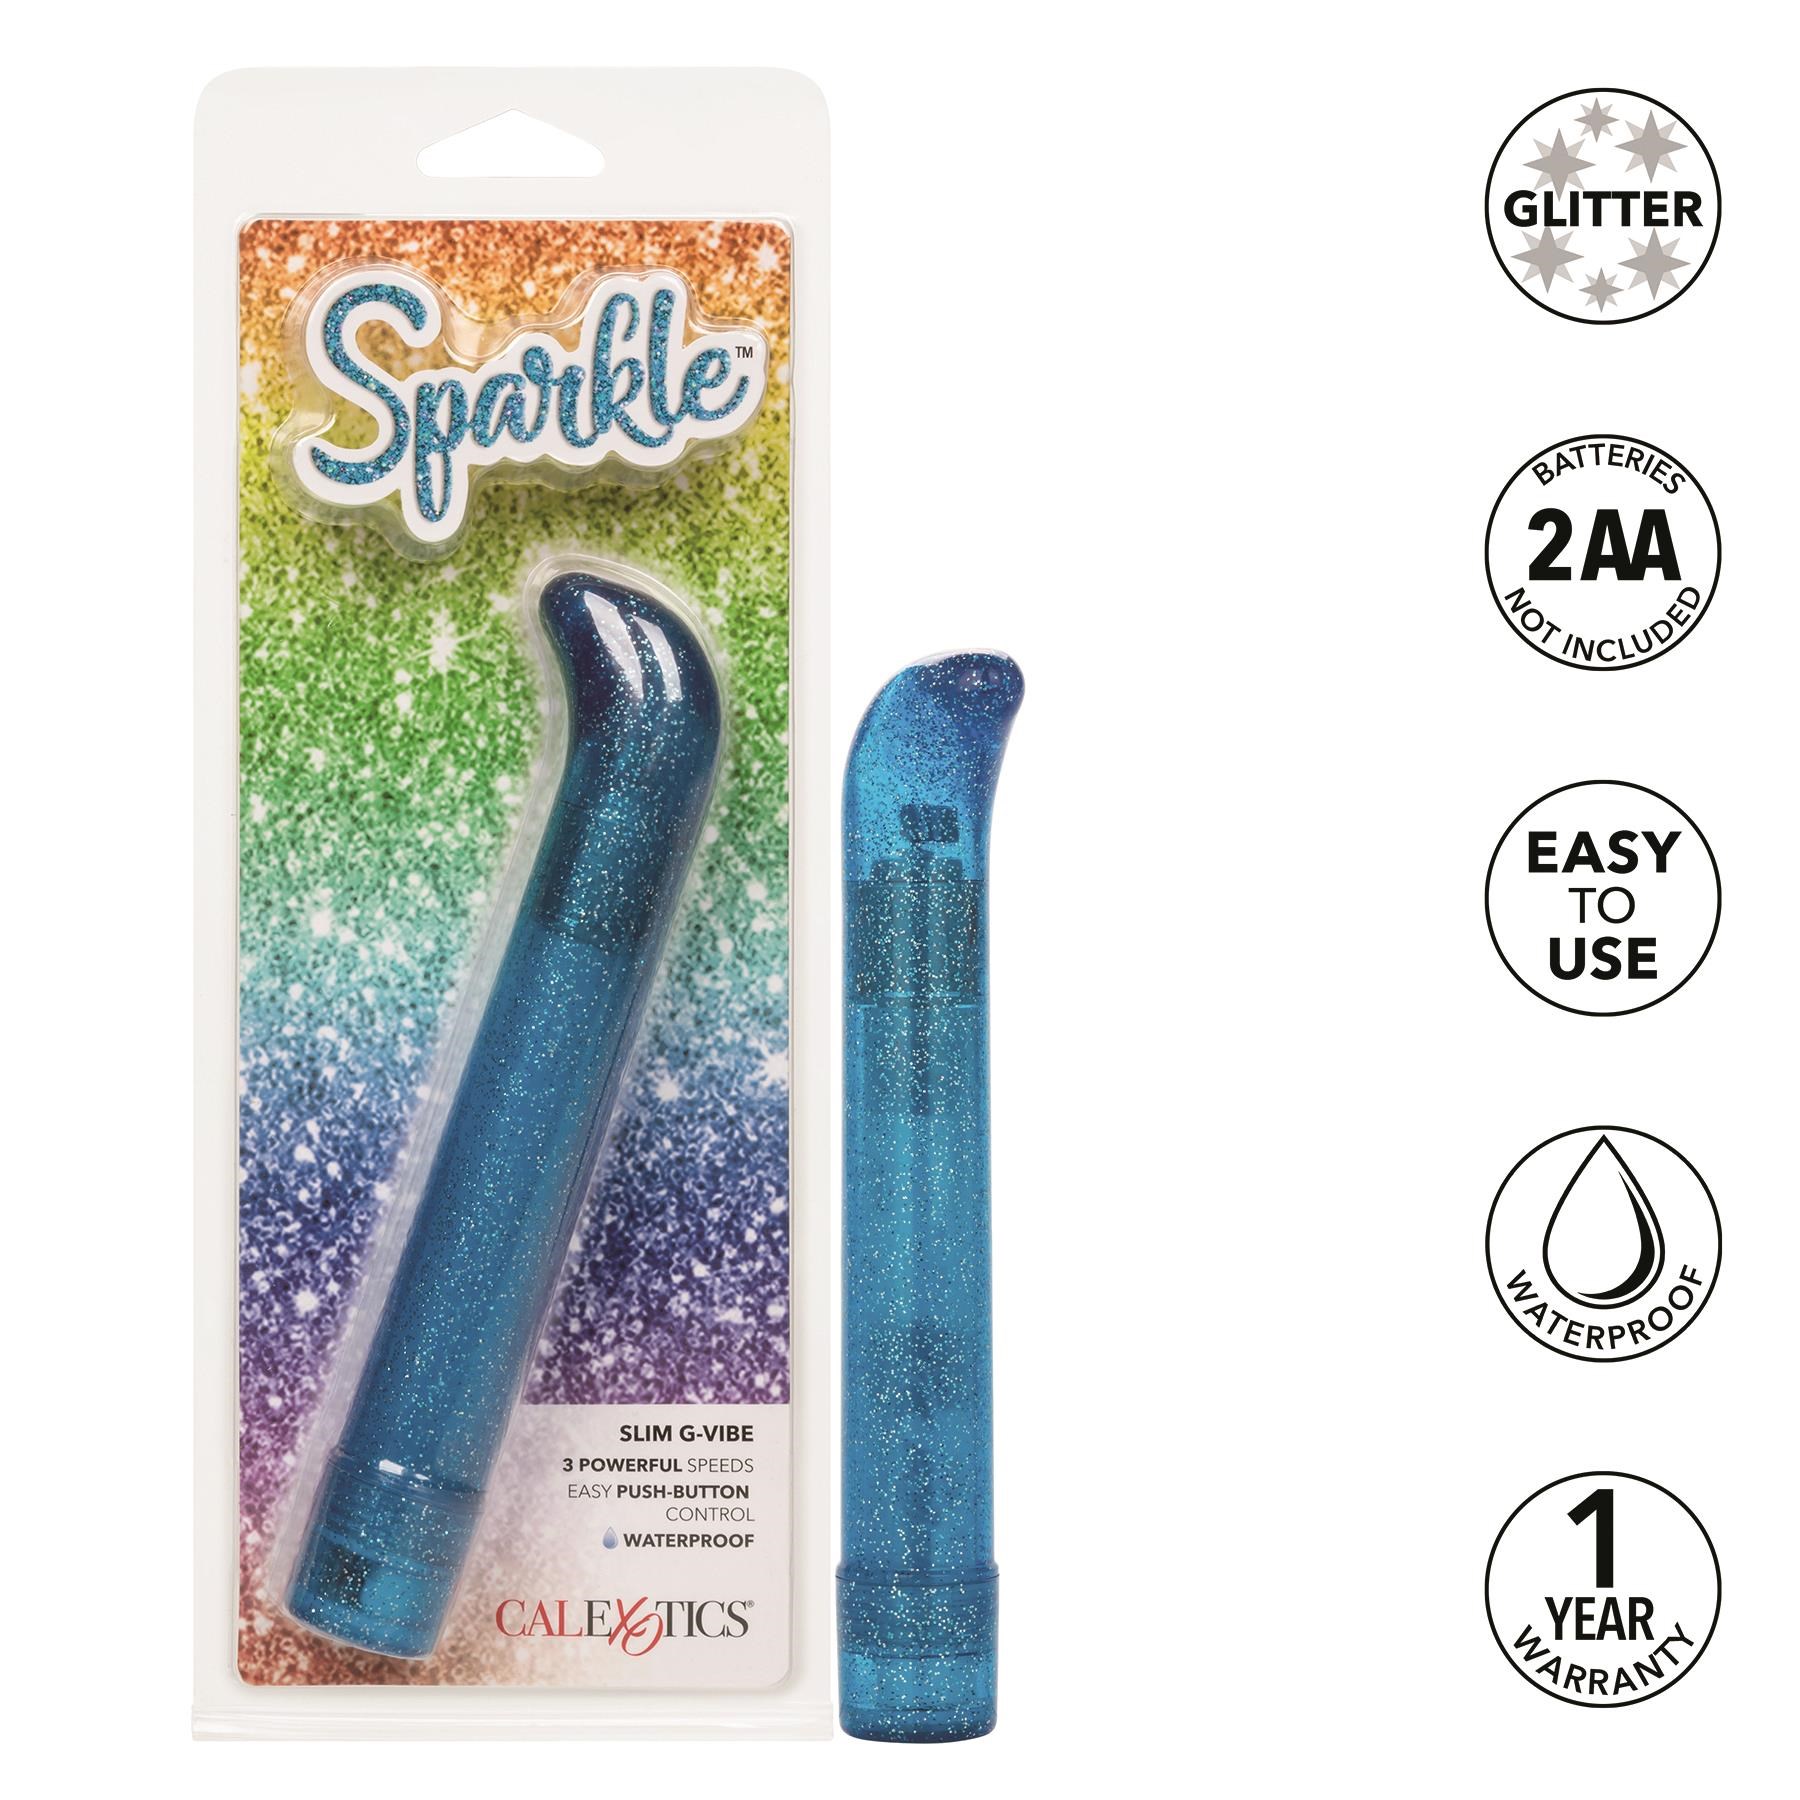 Sparkle Slim G Vibrator - Product, Packaging, and Features